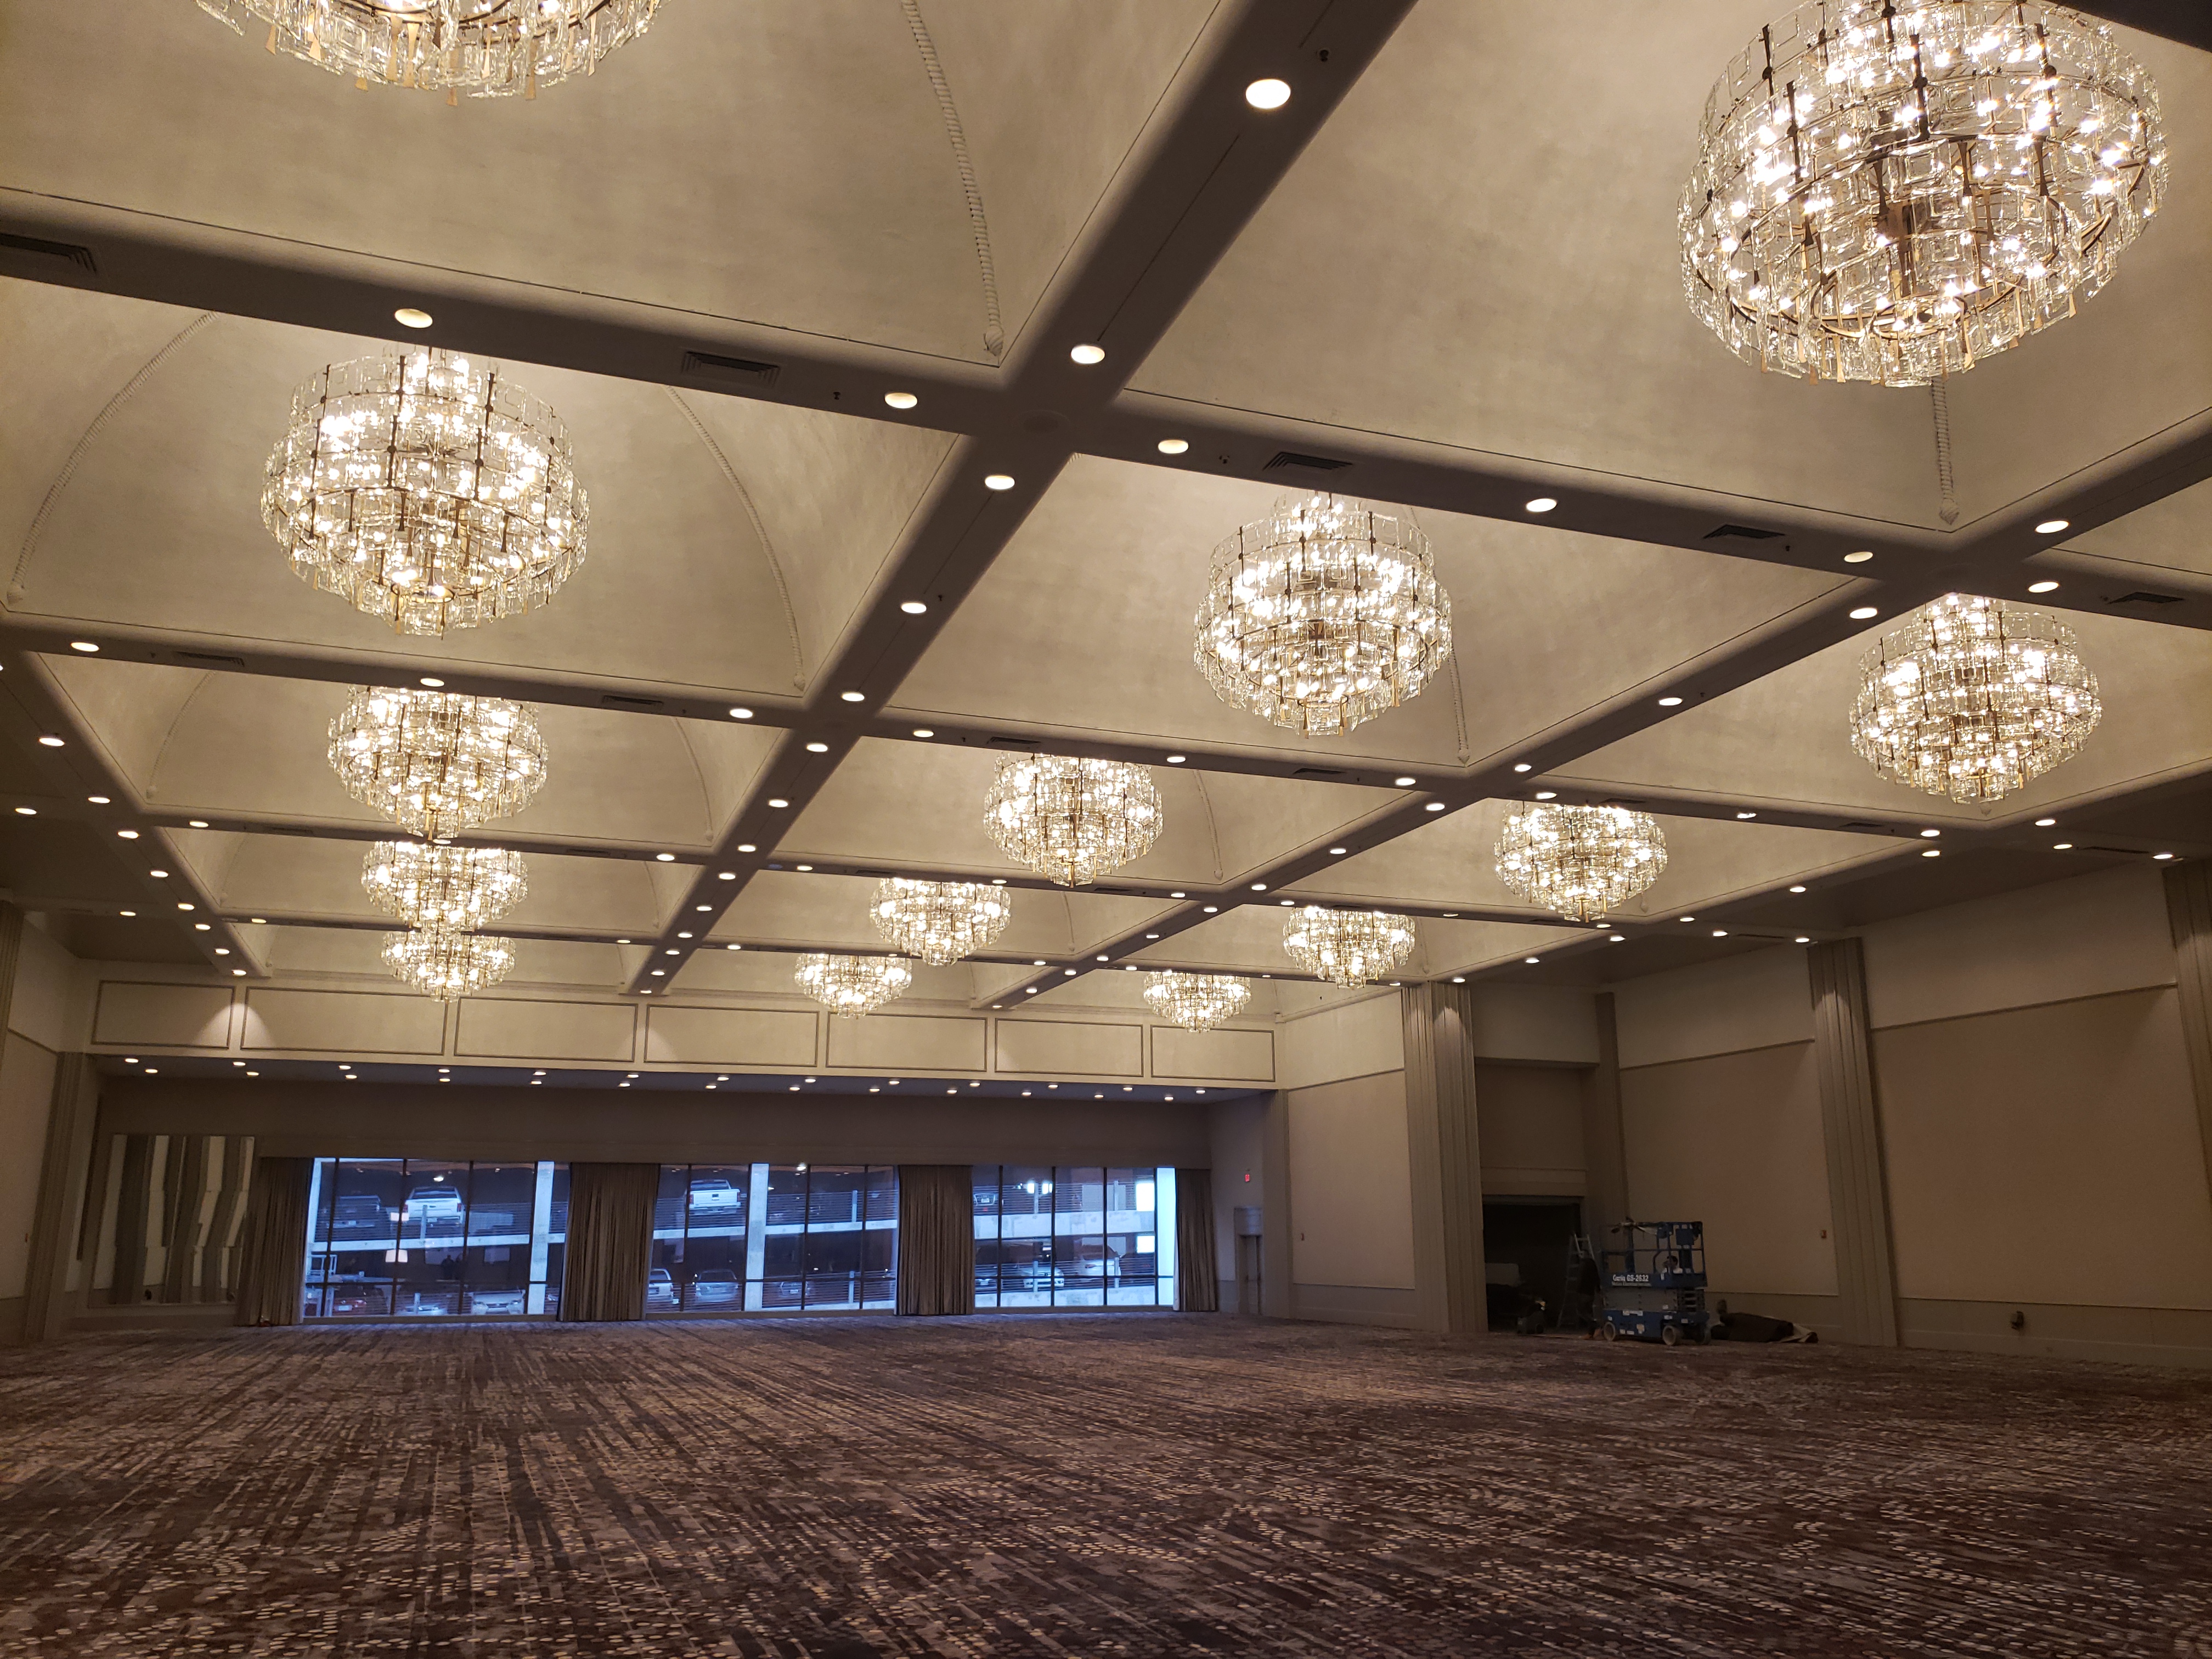 The Regency Ballroom the largest meeting and event room at the Fairmont Dallas has new chandeliers